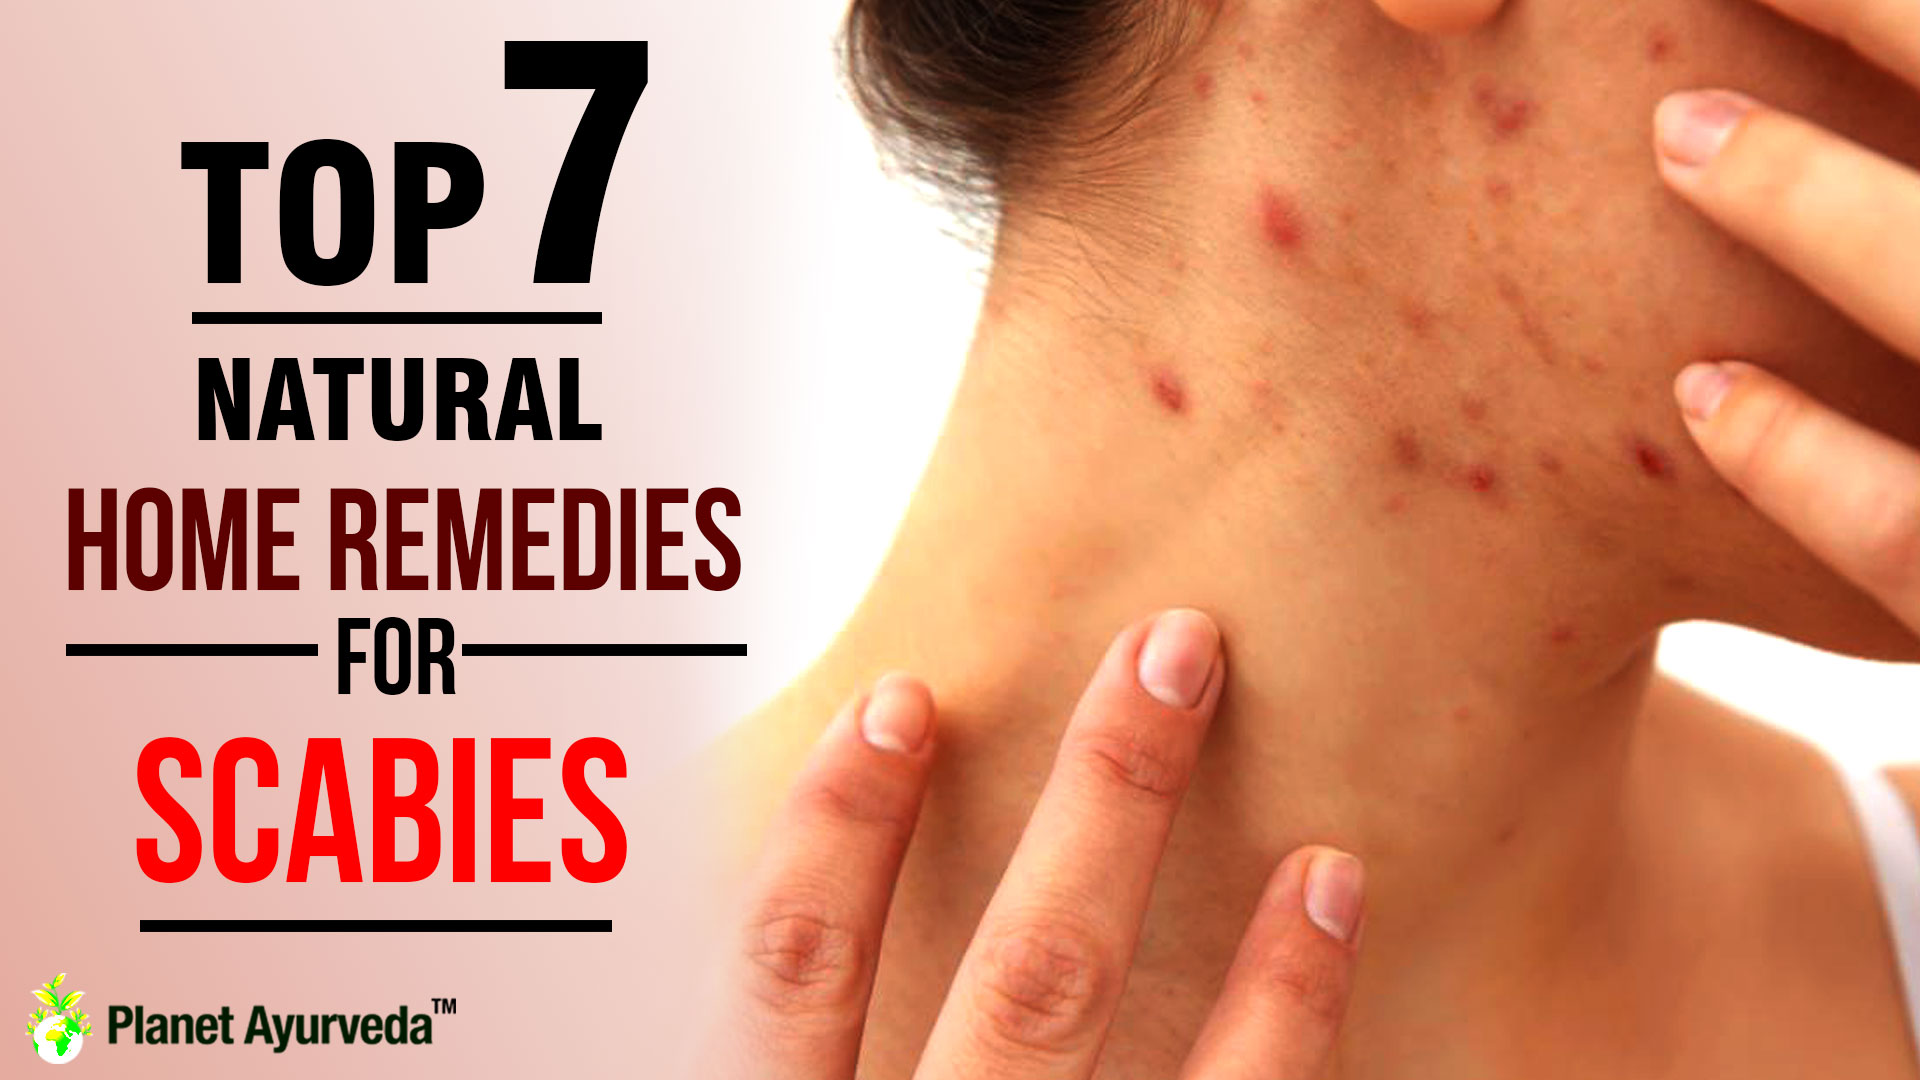 Natural Home Remedies for Scabies